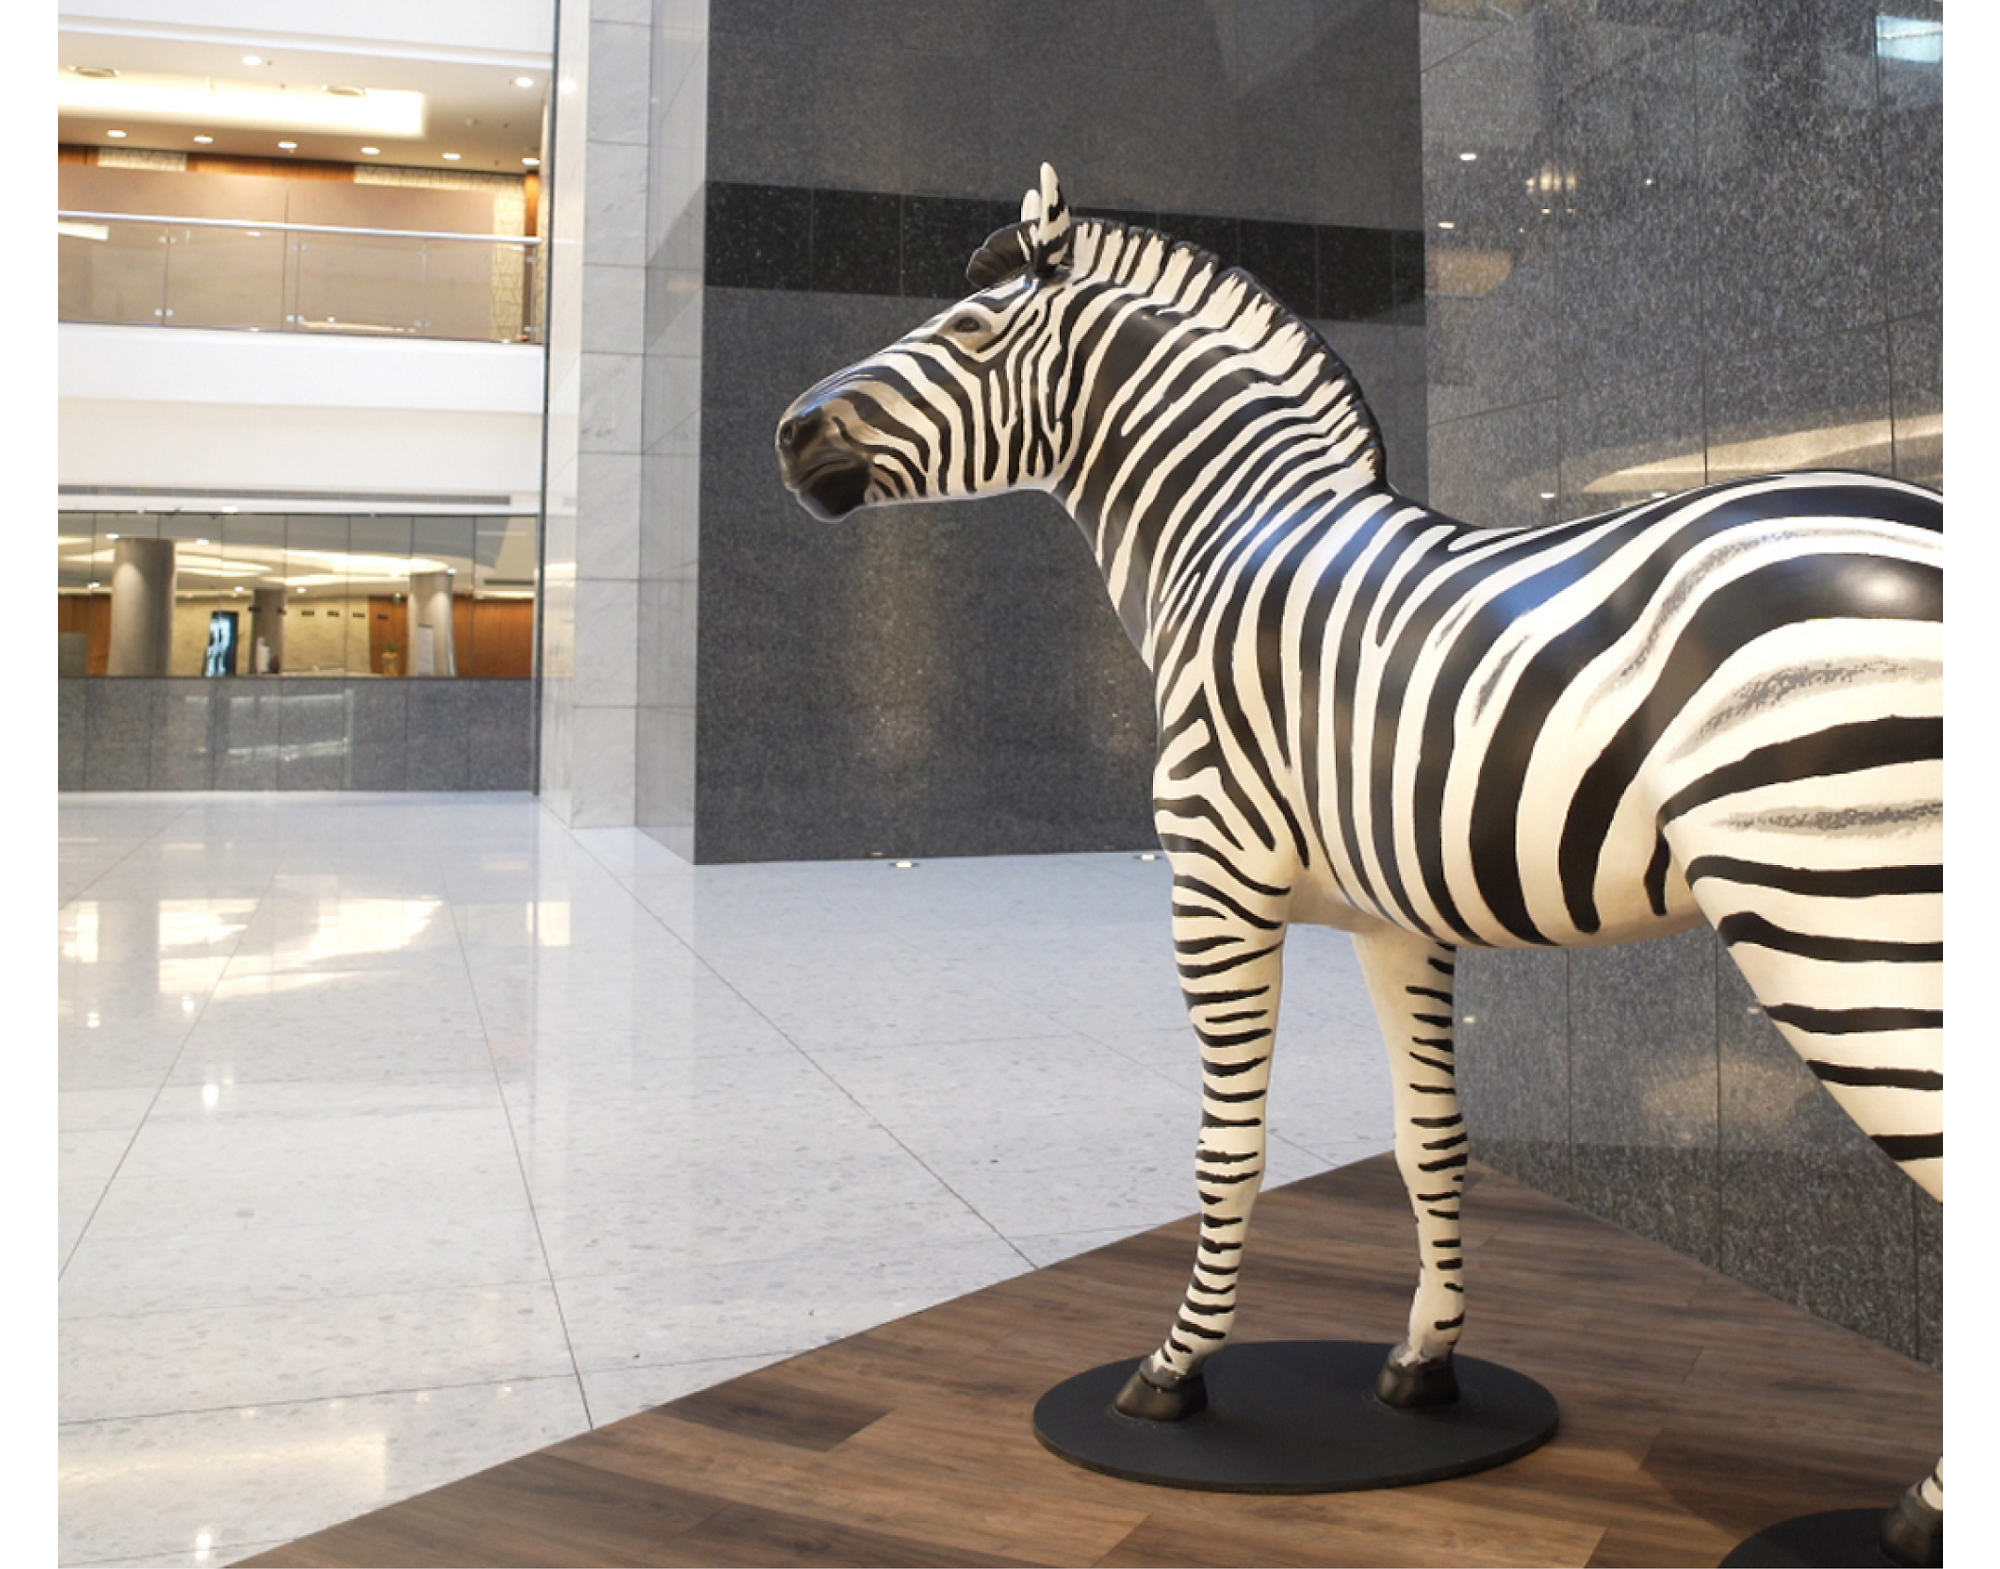 zebra sculpture in a modern building lobby with marble floors and tiered balconies in the background.